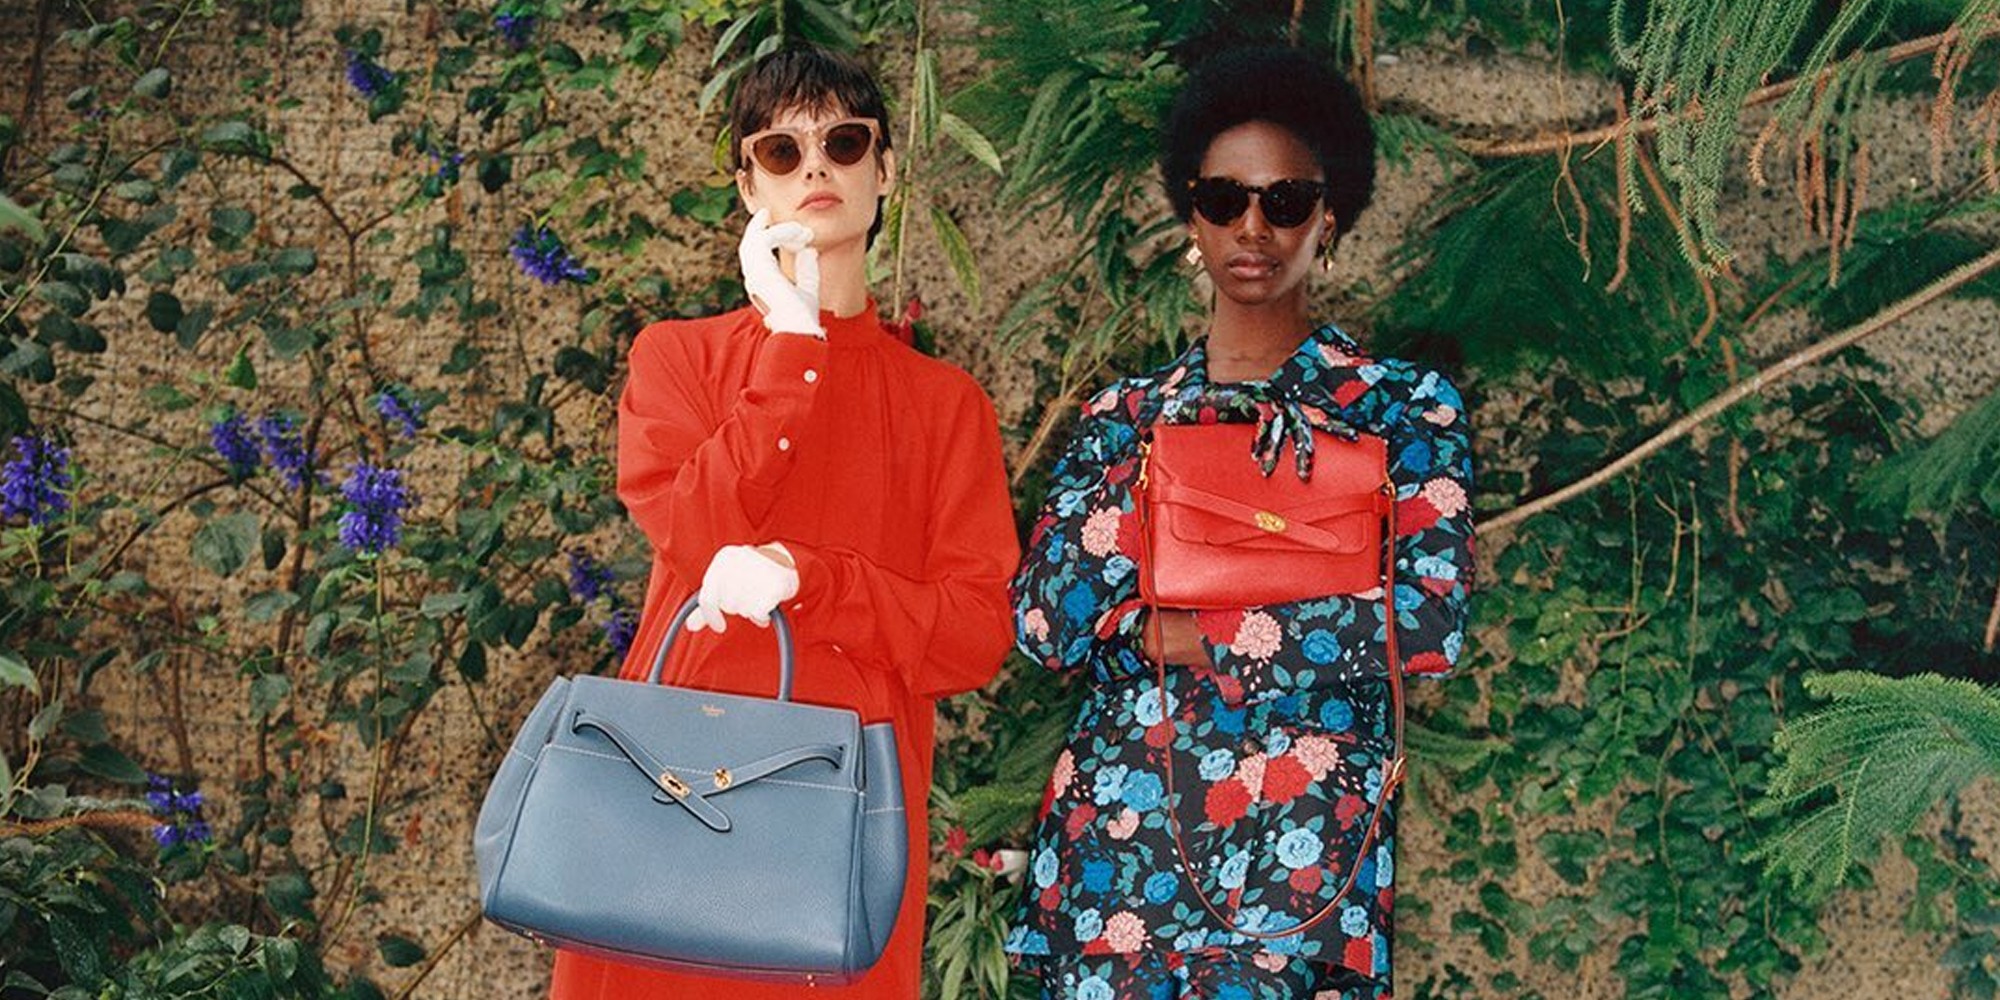 SHOP THE MULBERRY SPRING 2020 COLLECTION